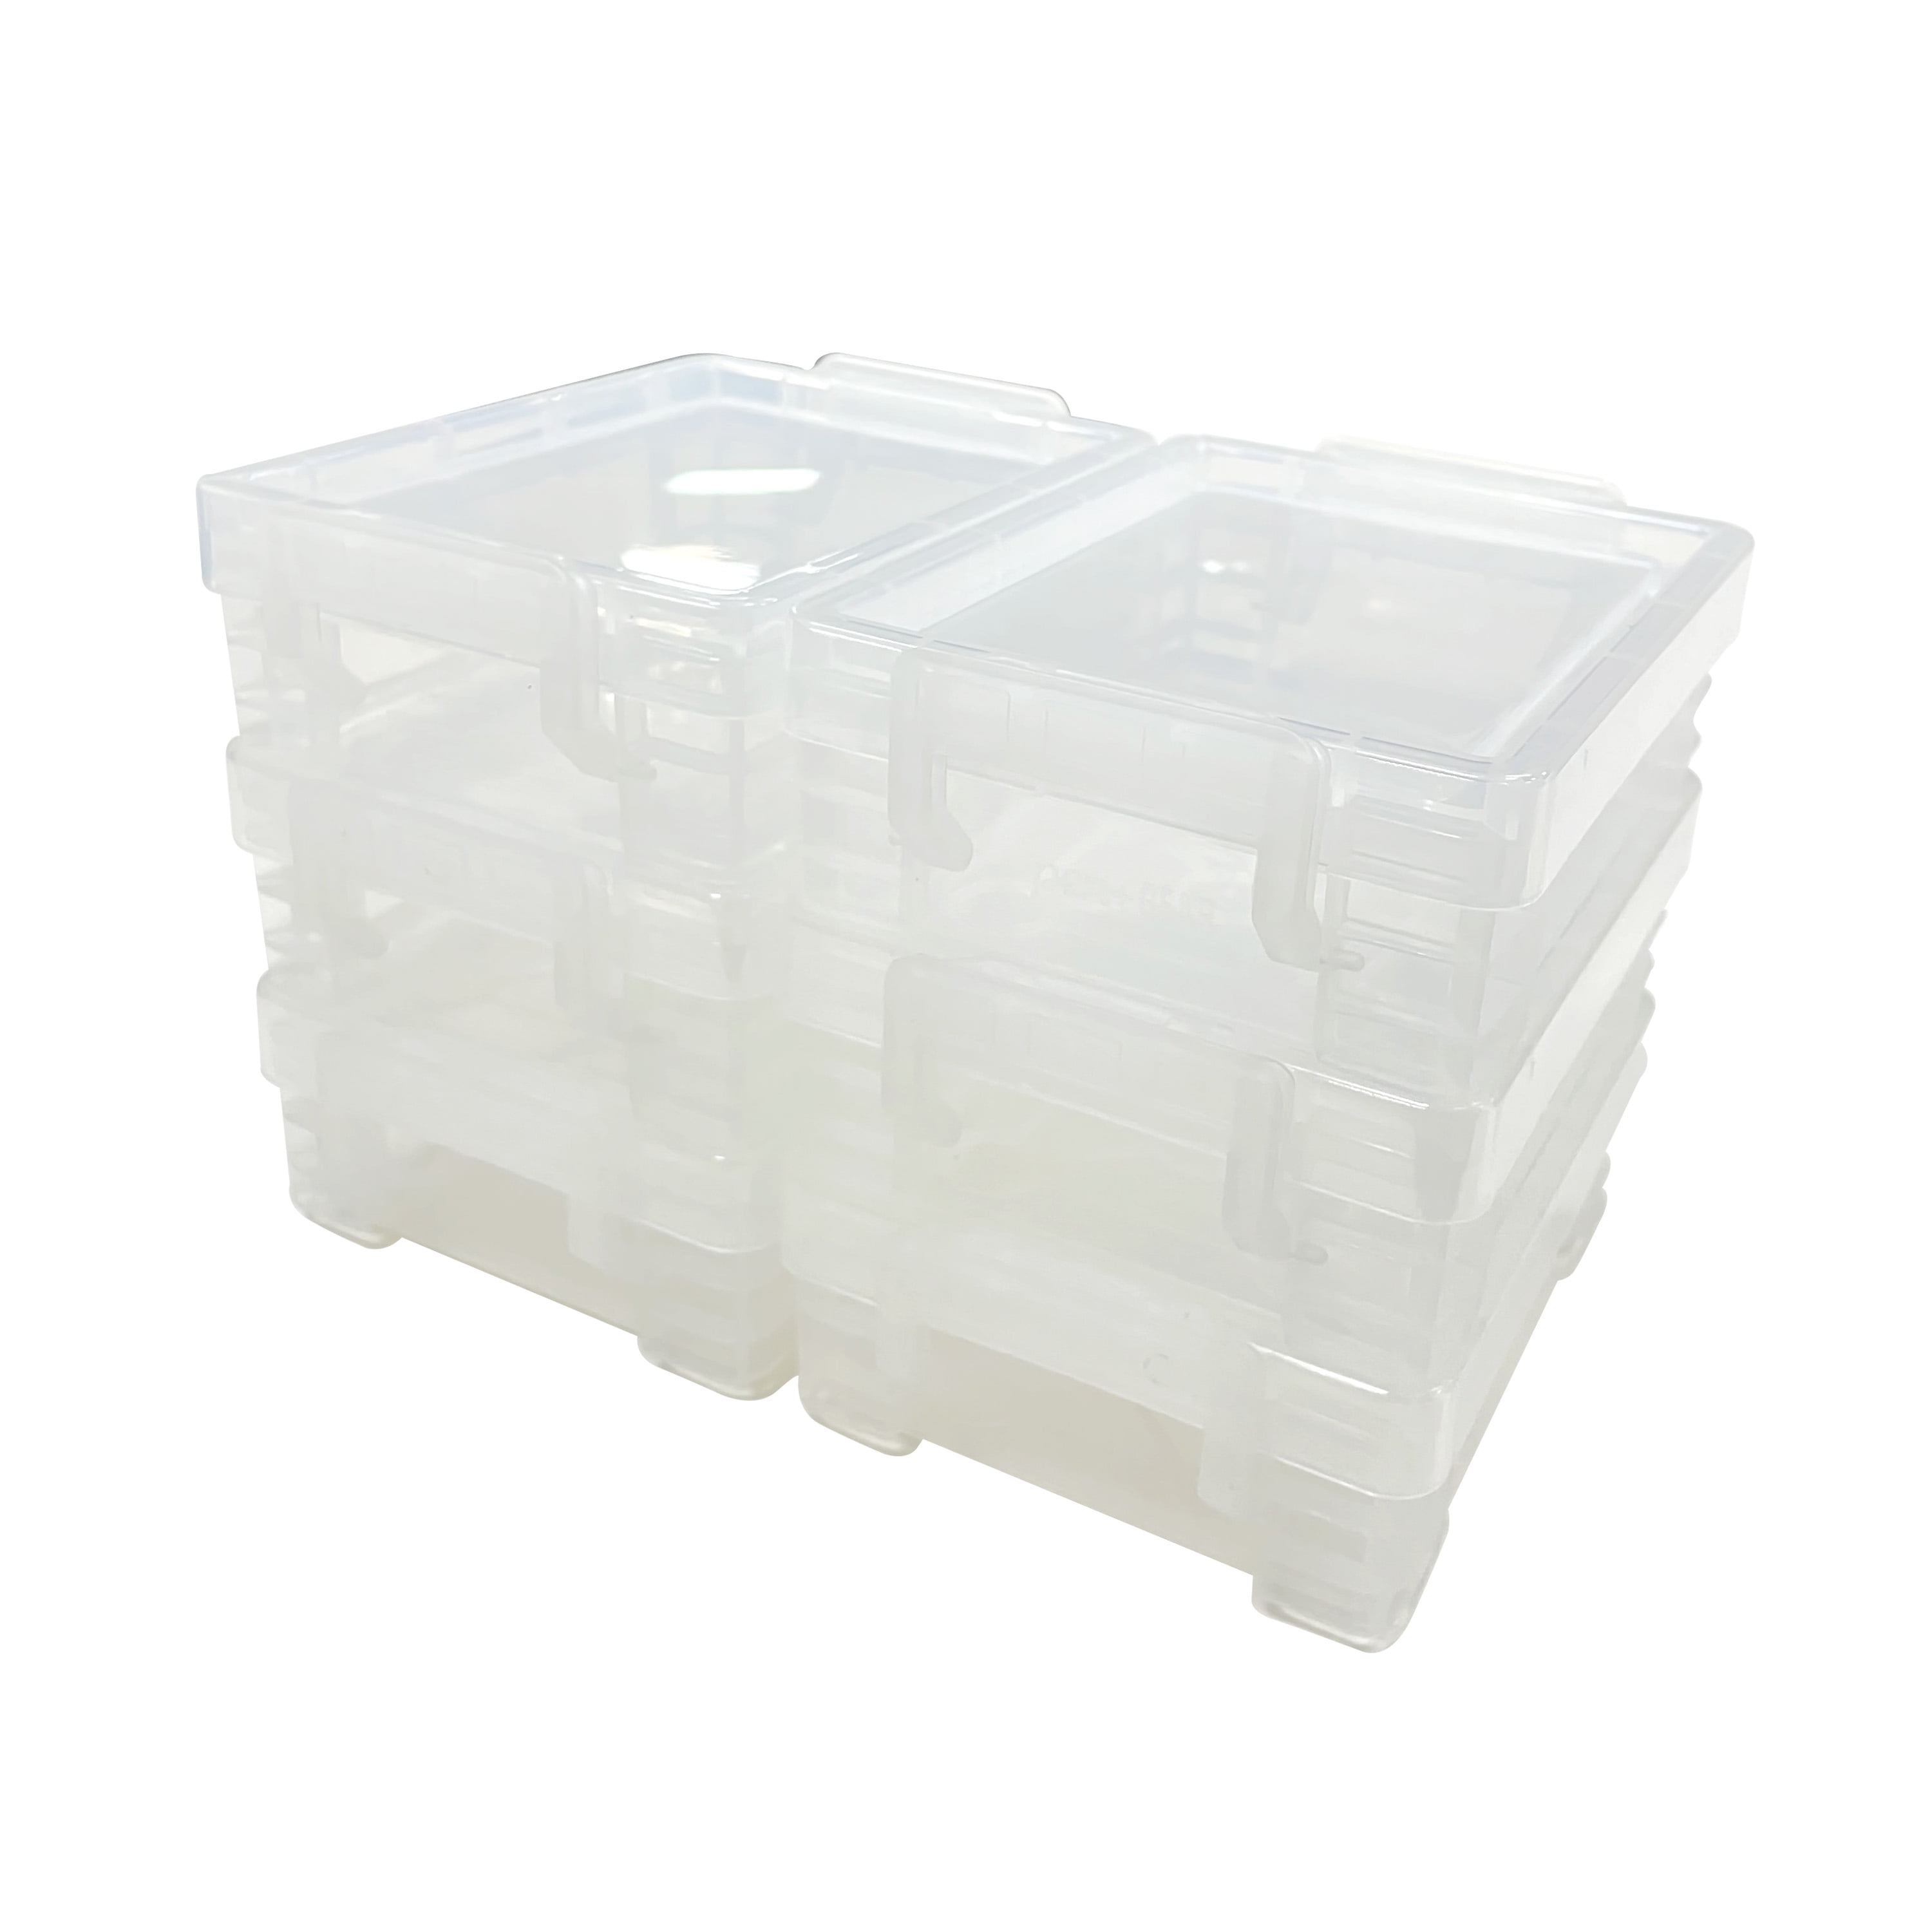 Pen + Gear Large Recycled Kraft Moving and Storage Box, 24L x 16W x 19H